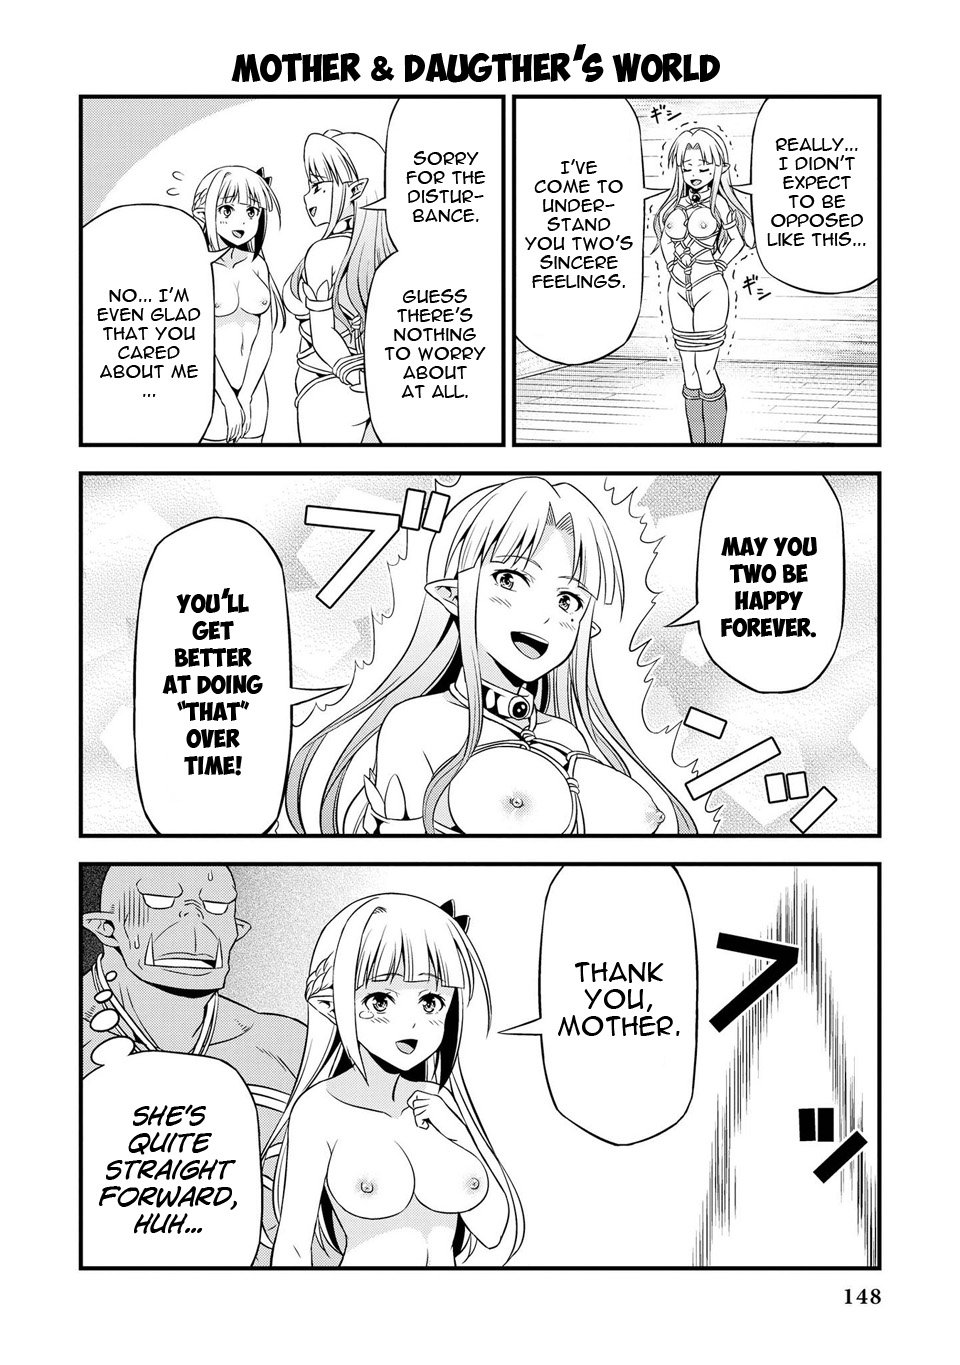 Hentai Elf to Majime Orc Vol. 5 Ch. 10 Mother has arrived